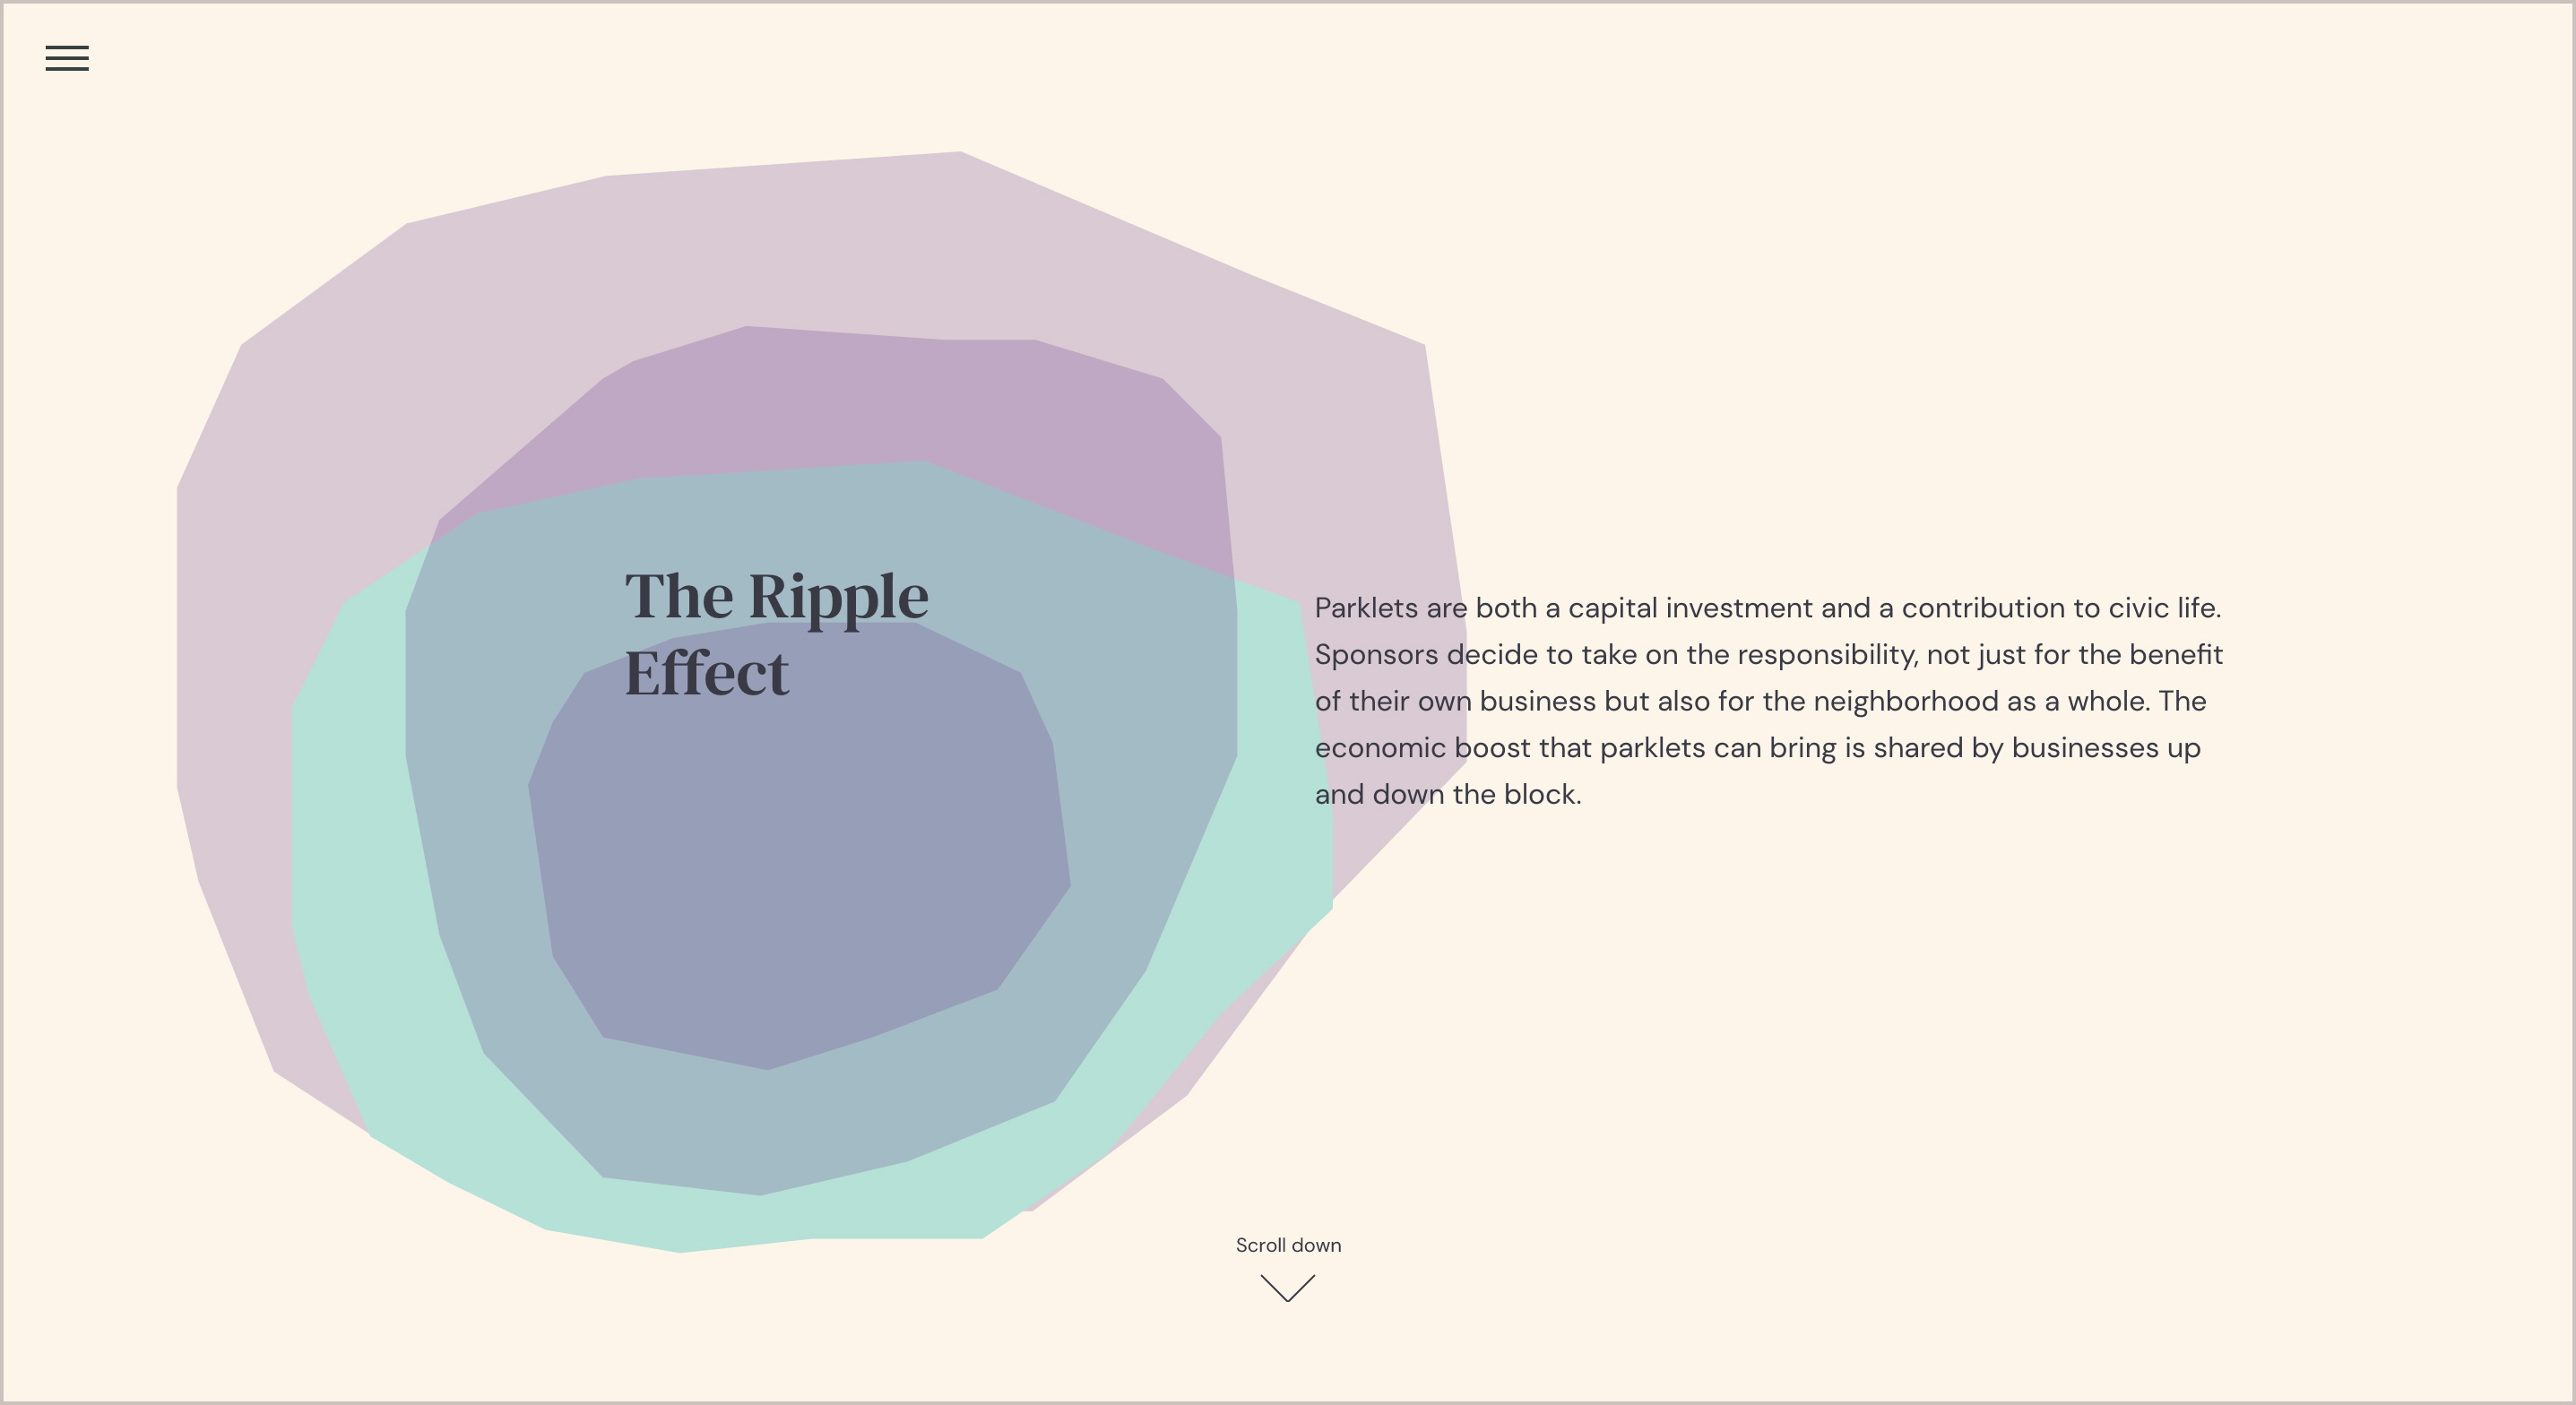 Section 3: The Ripple Effect